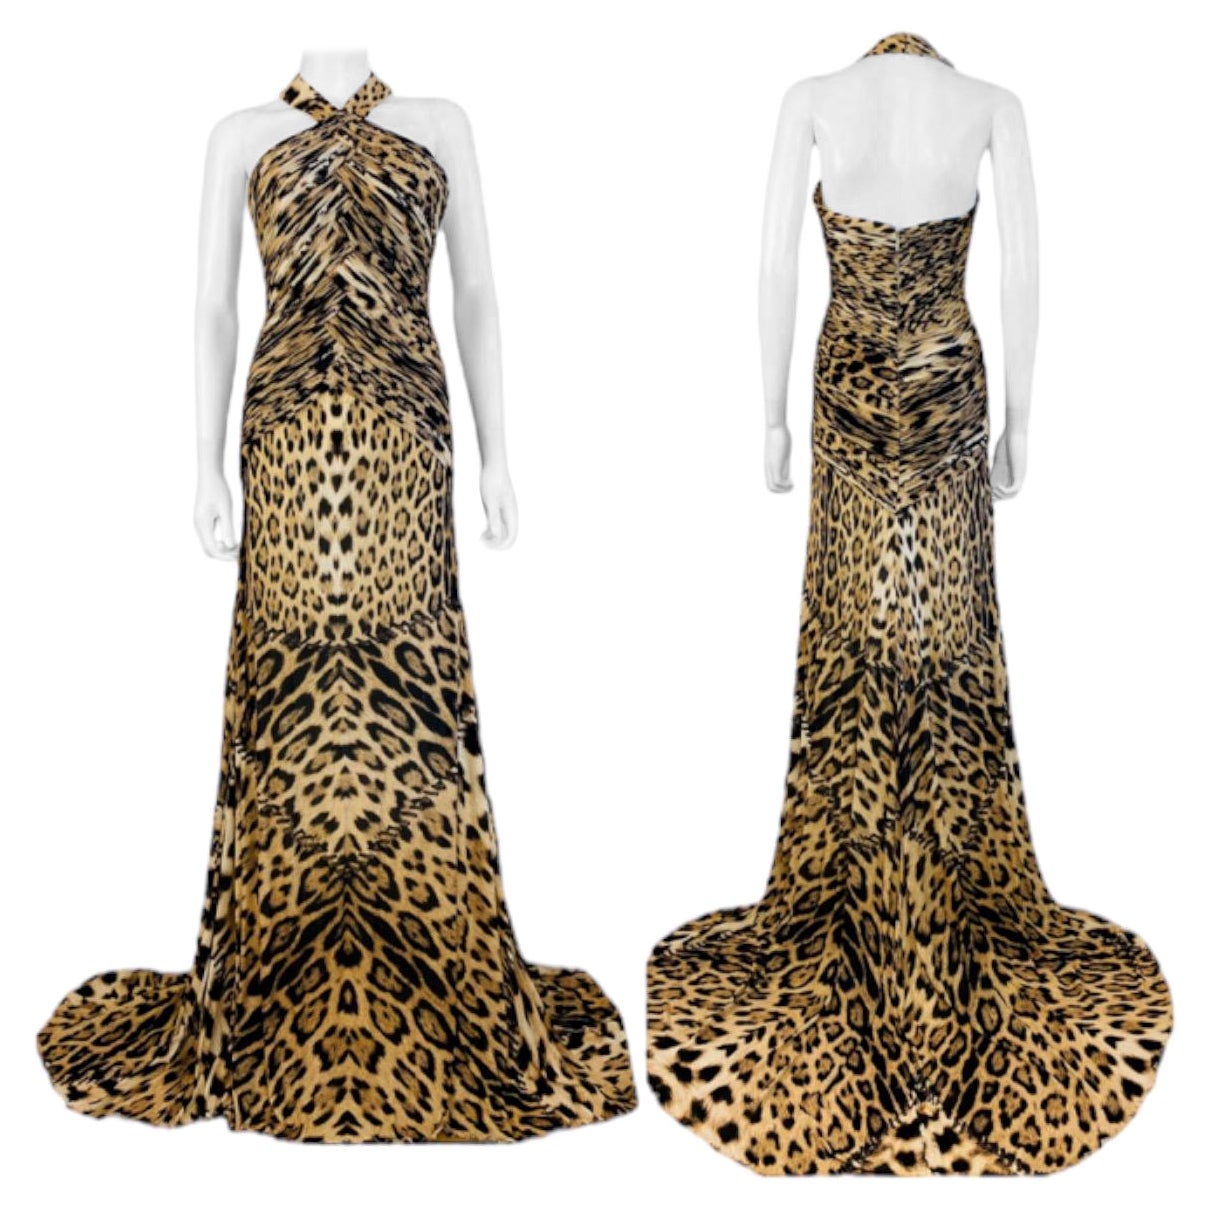 Fabulous 2000s Roberto Cavalli Leopard Dress
Stretch rayon + silk fabric in bold oversized leopard print with stitch details
Halter neckline
Fitted bodice with gathered fabric details
Long fitted skirt with flared hem + long train
Fully lined
Hidden